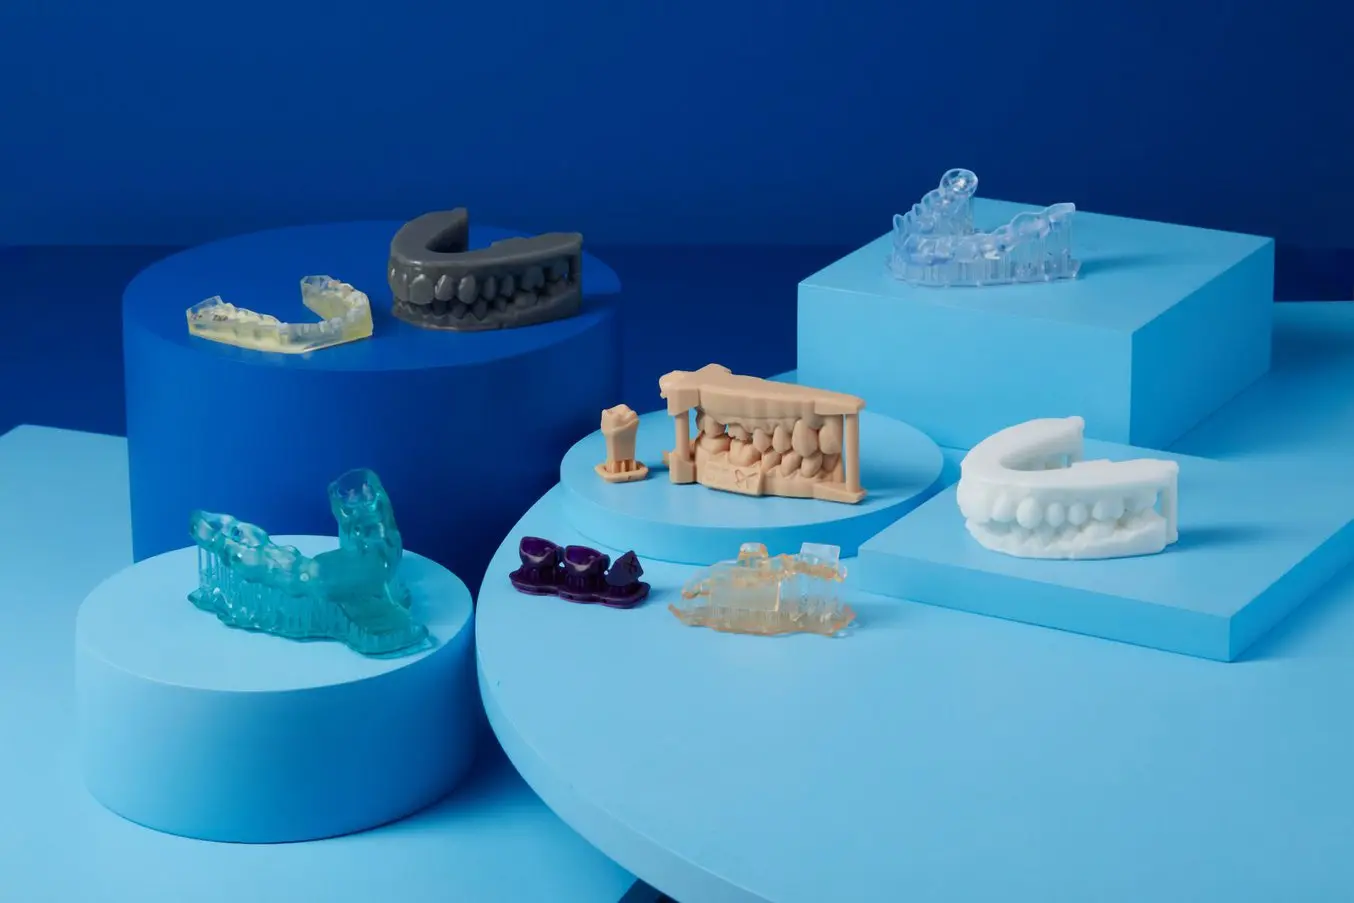 A variety of dental parts printed in different resins